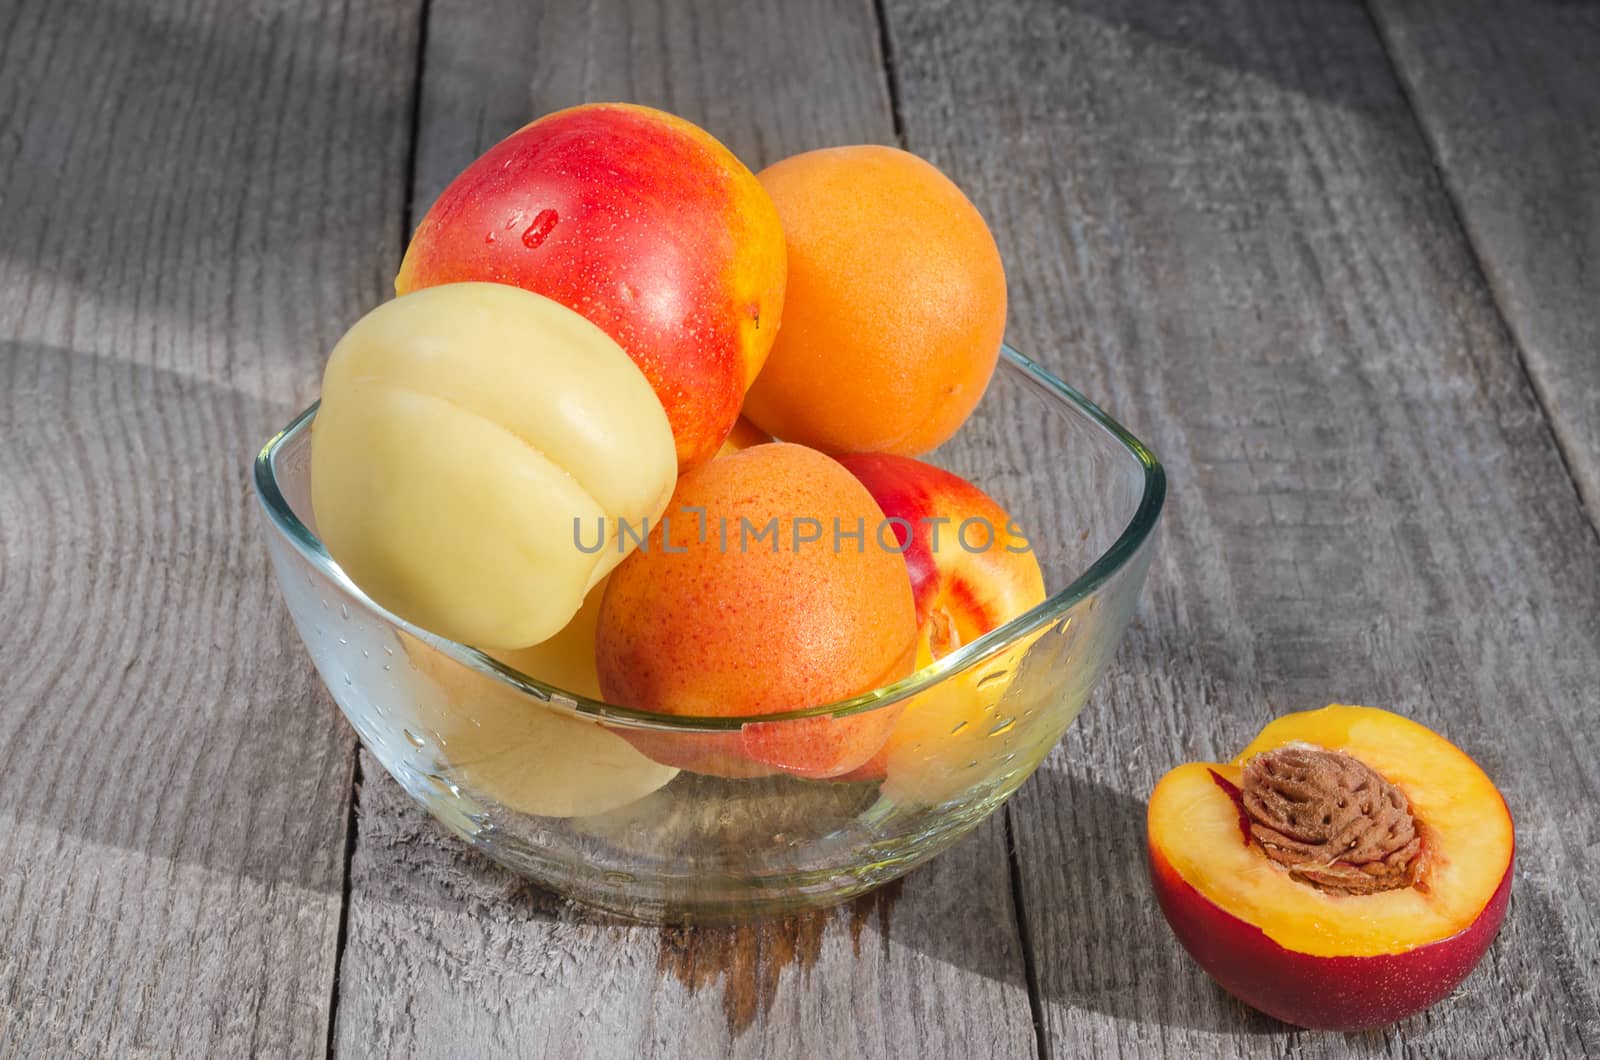 Southern fruit apricots and nectarines, in a vase on a gray wooden background